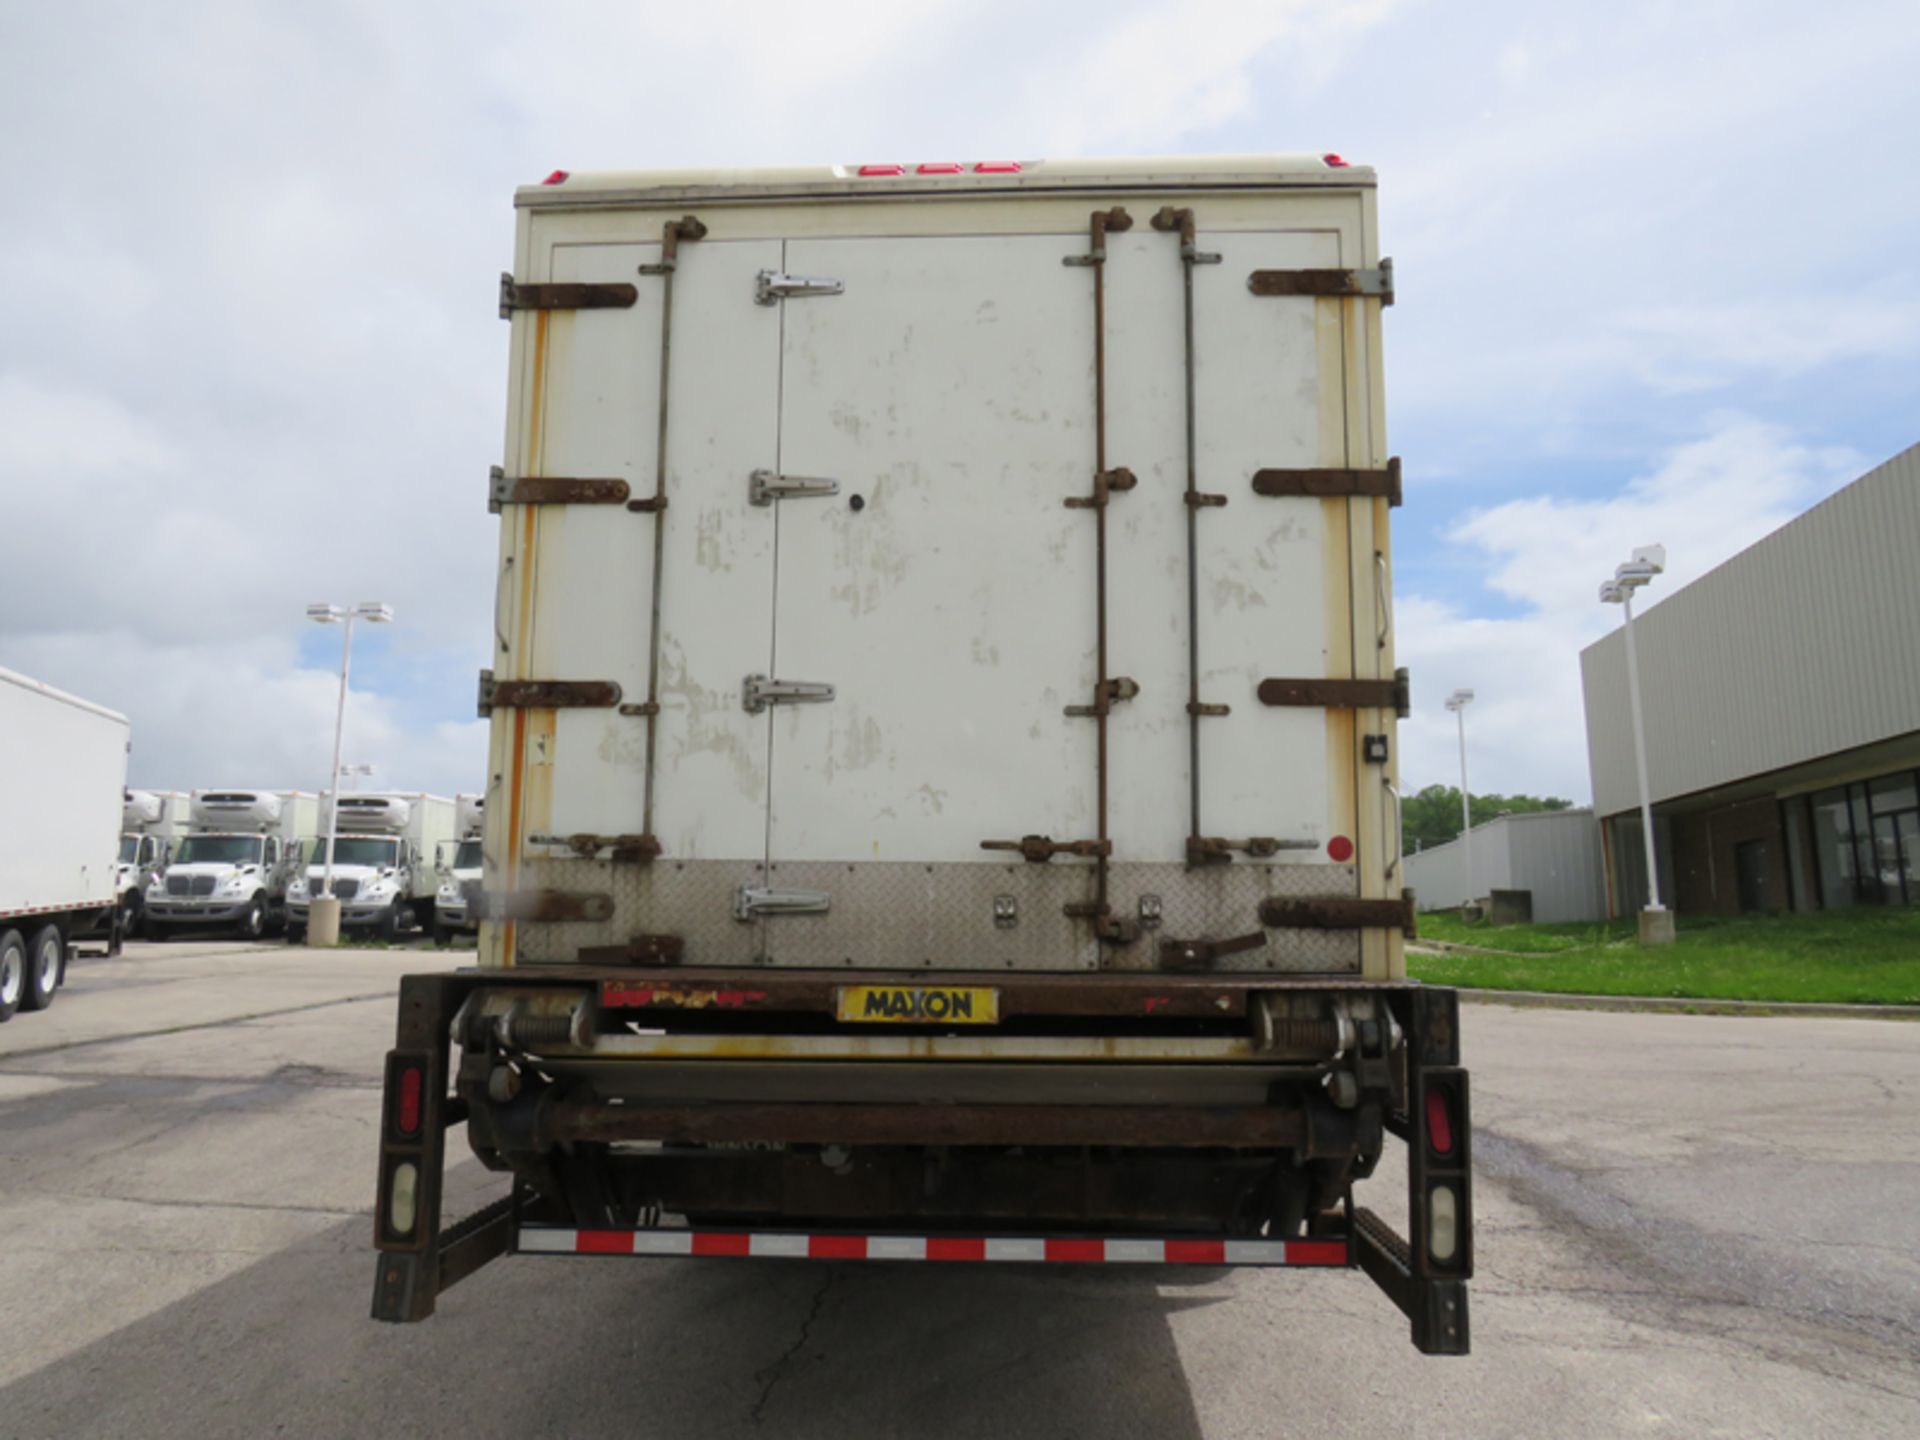 2018 INTERNATIONAL 4400 SBA 6X4 REFRIGERATED BOX TRUCK VIN#: 1HTMSTAR0JH529562, Approx Miles: 40014, - Image 4 of 9